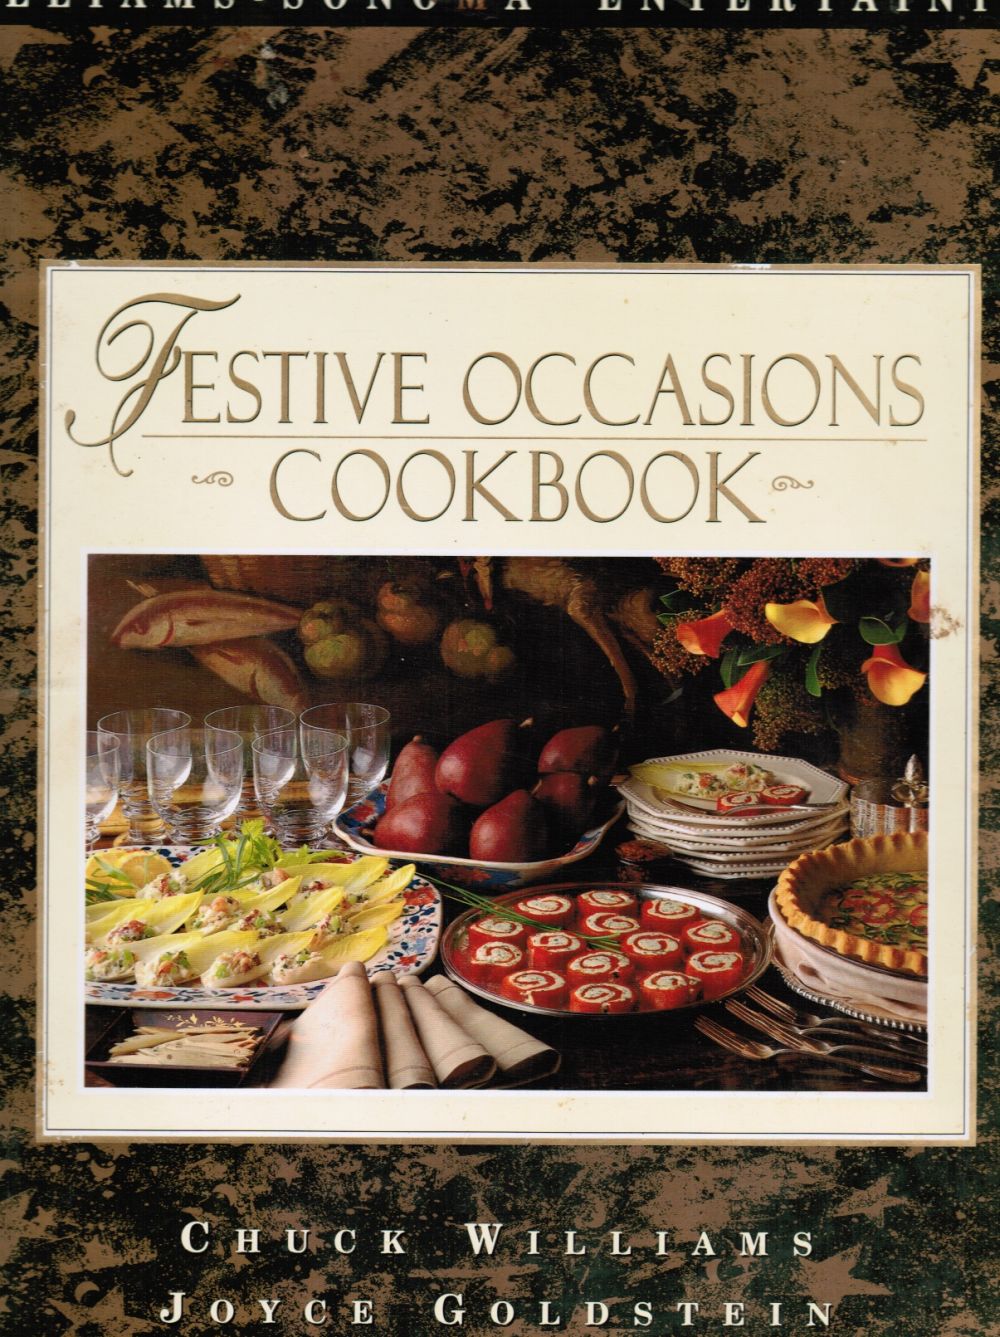 GOLDSTEIN, JOYCE (MENU CONCEPTS AND RECIPES) ; CHUCK WILIAMS (GENERAL EDITOR) - Festive Occasions Cookbook